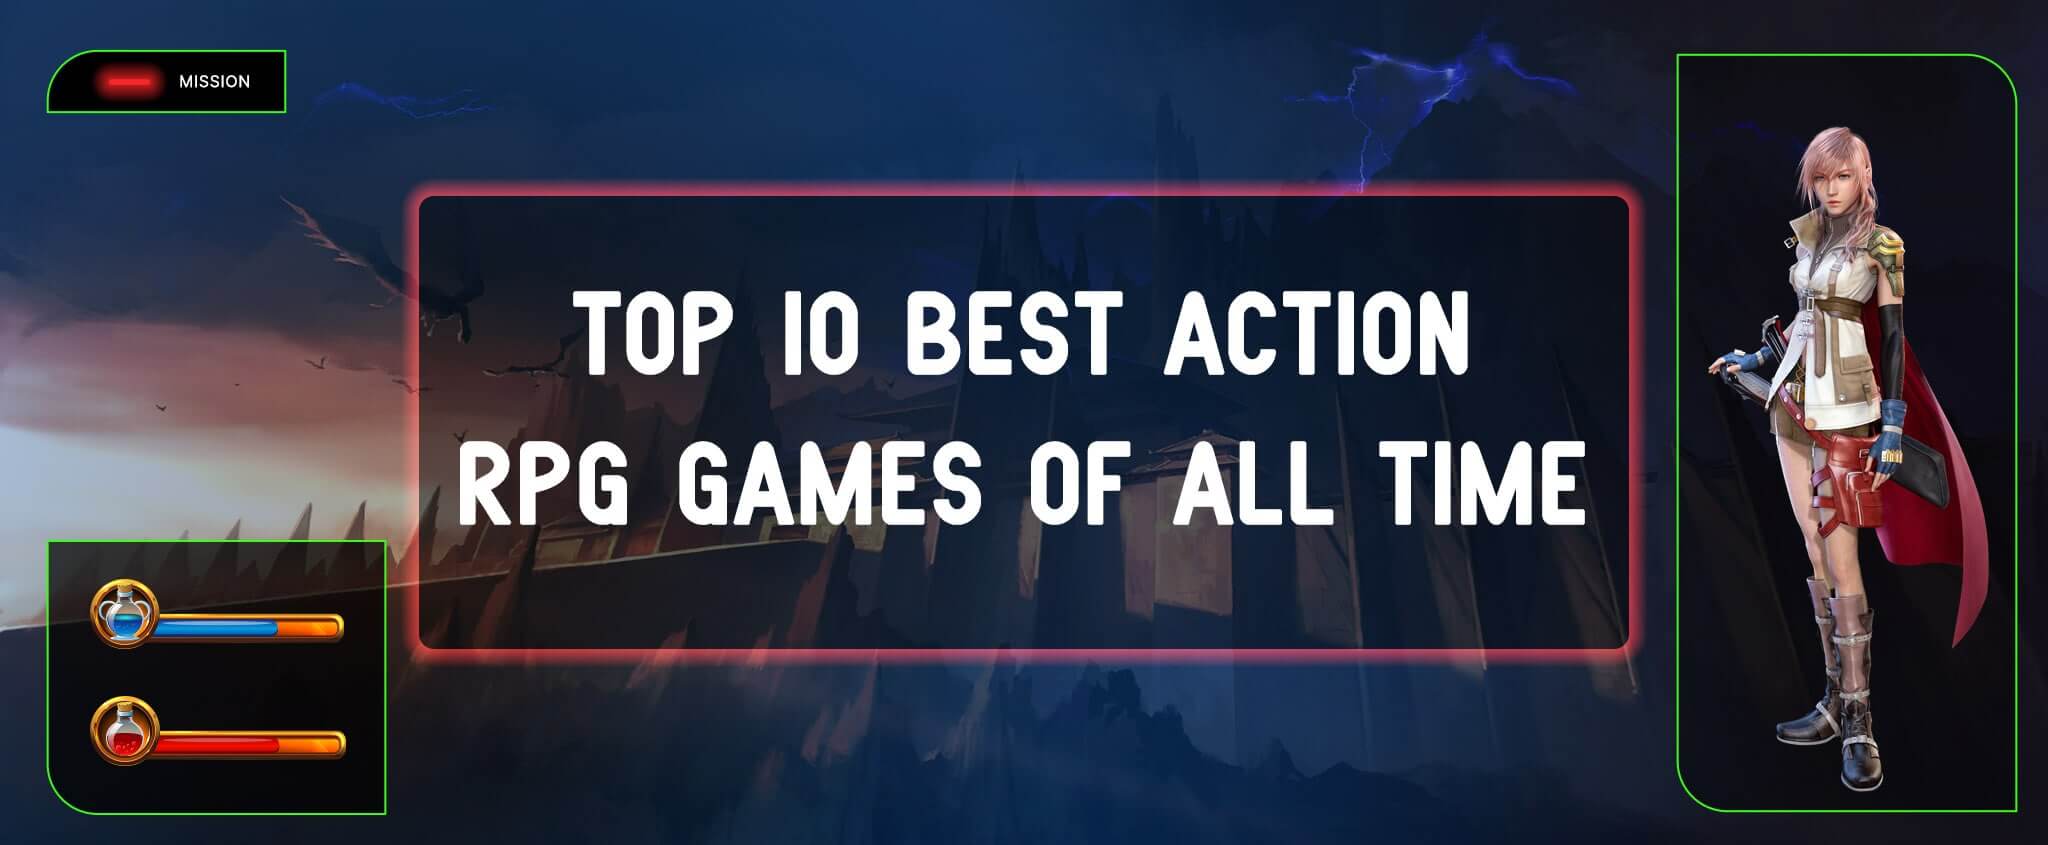 Top 10 Best Action RPG Games of All Time